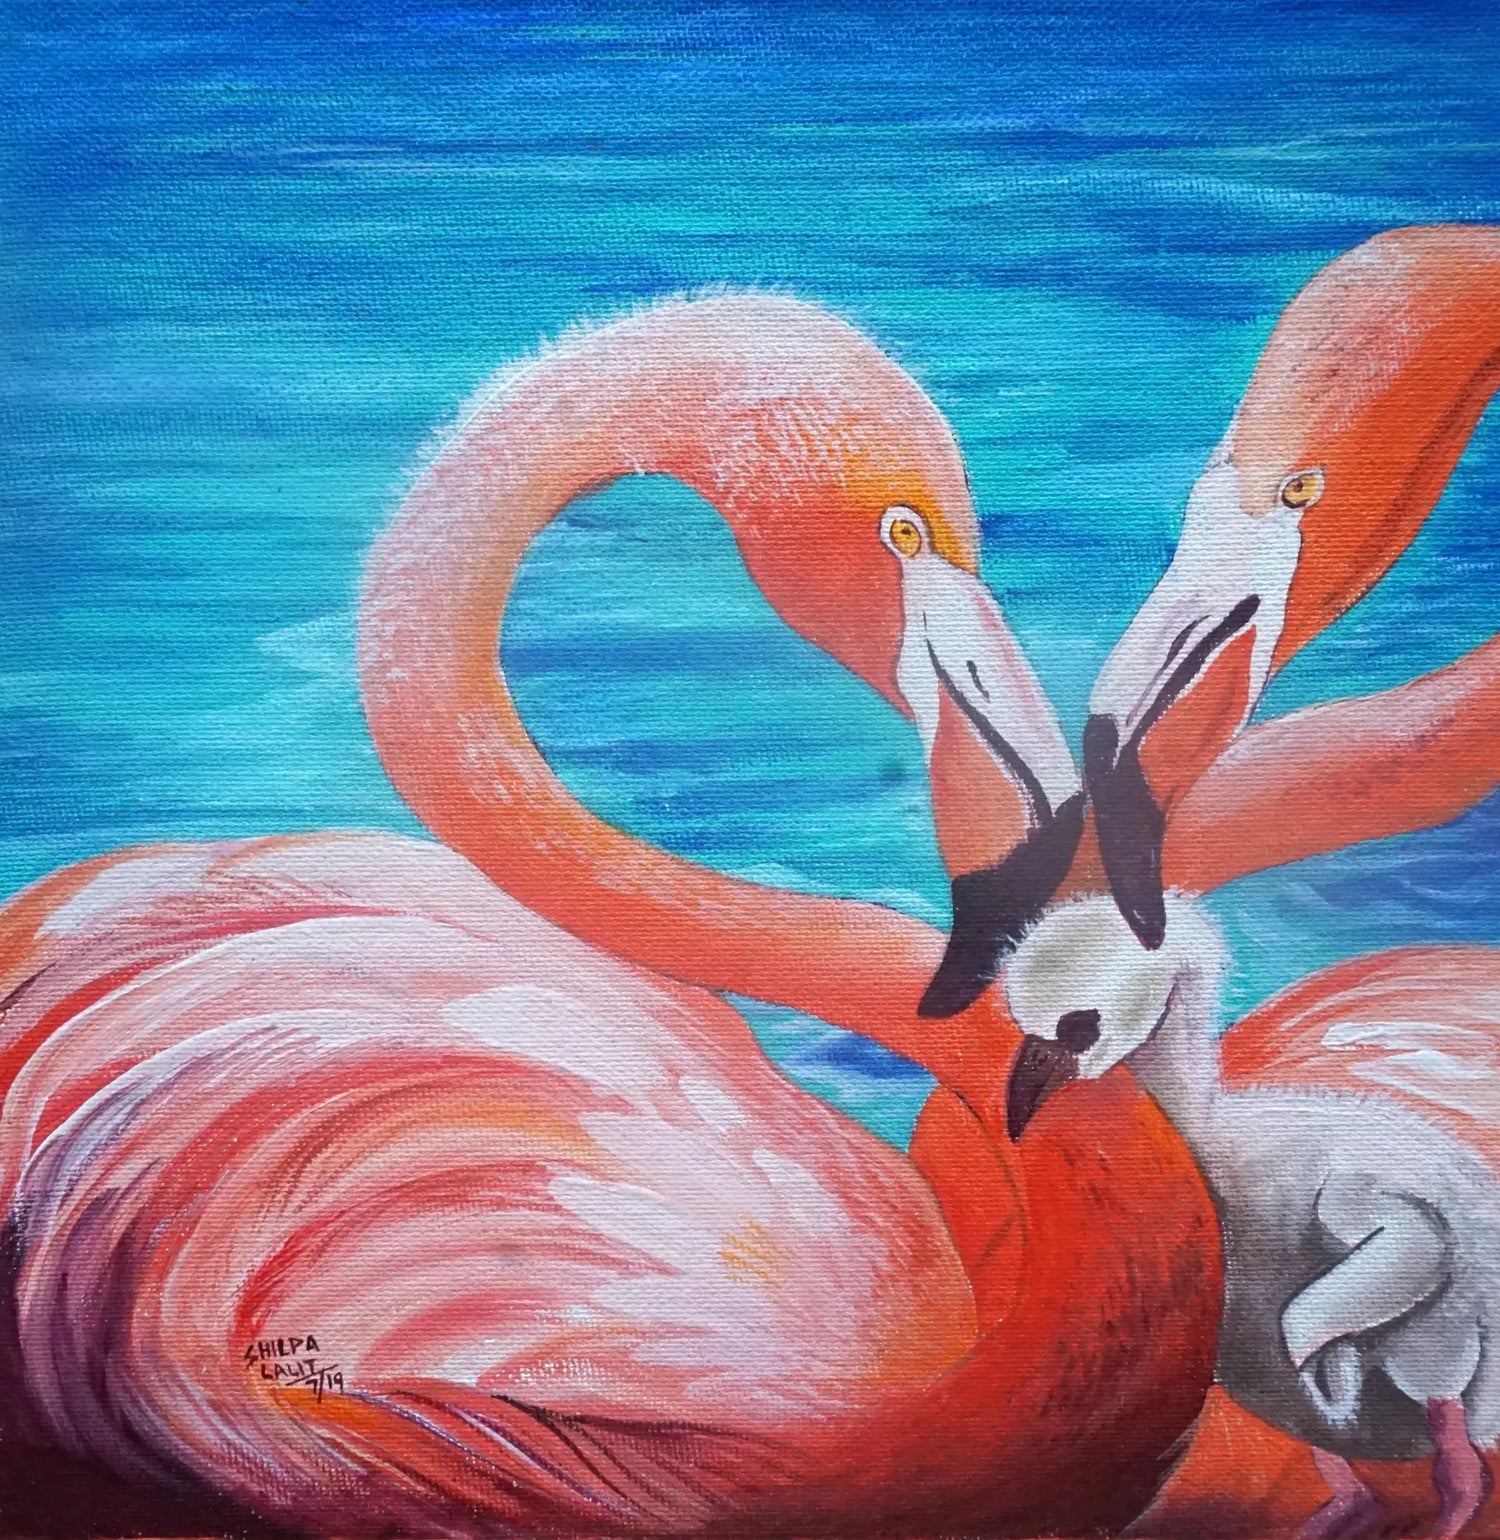 Flamingo Art Supply Box and Painting Lesson – Let's Create Art Online